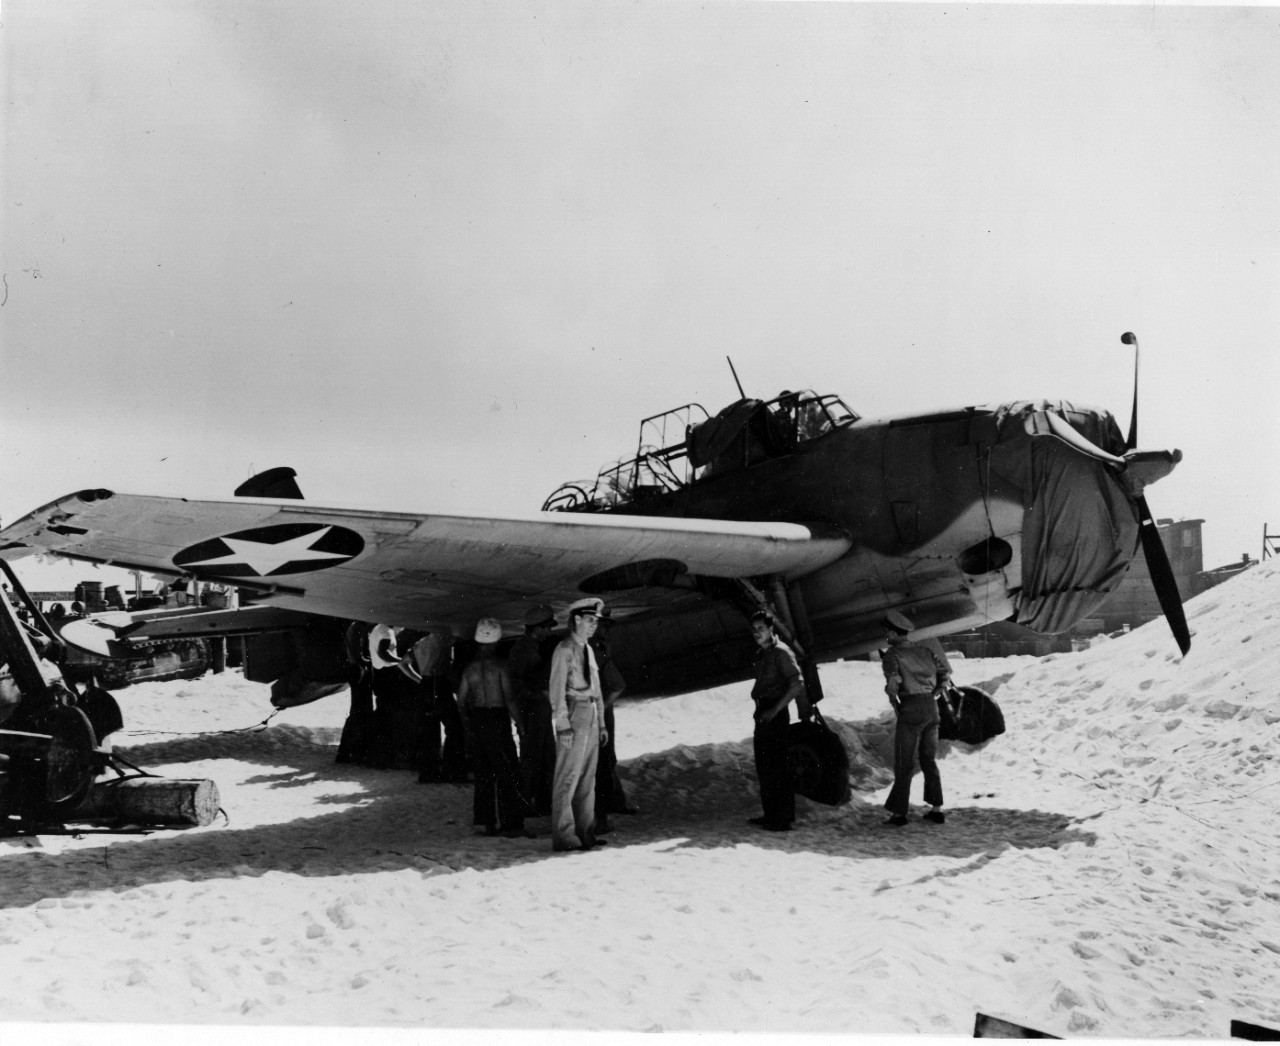 Photo #: 80-G-11637  Battle of Midway, June 1942